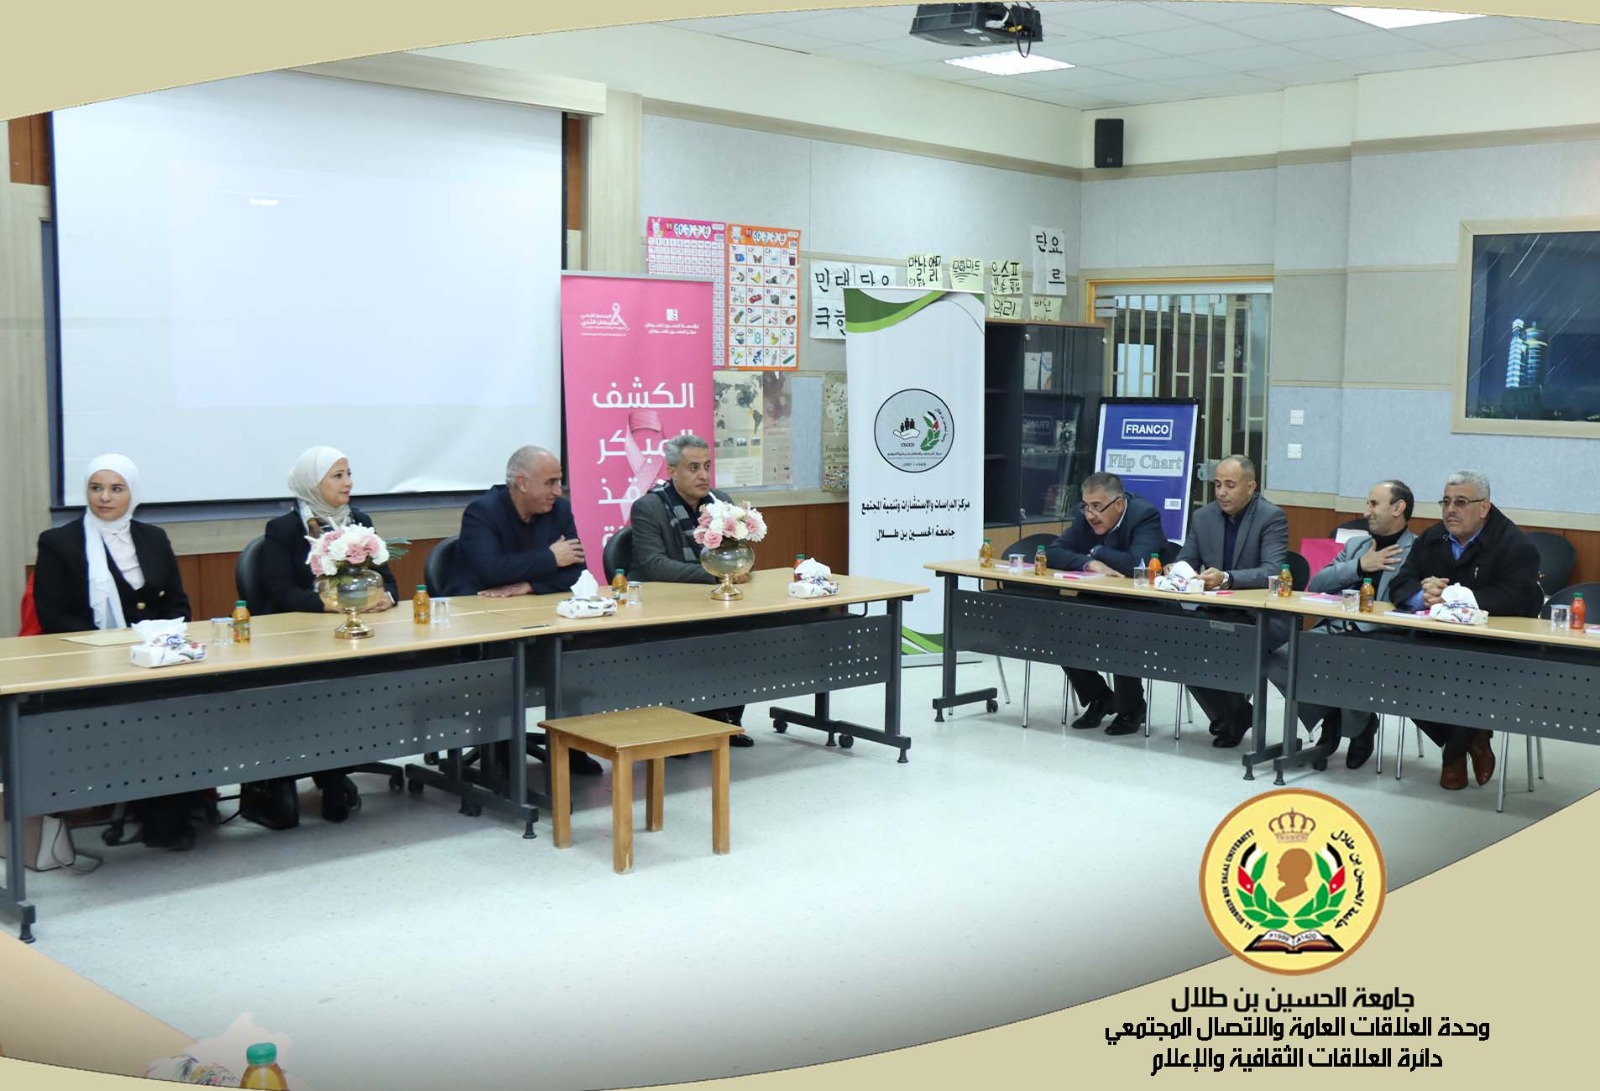 A cooperation agreement and a dialogue session to raise awareness about cancer at Al Hussein Bin Talal University